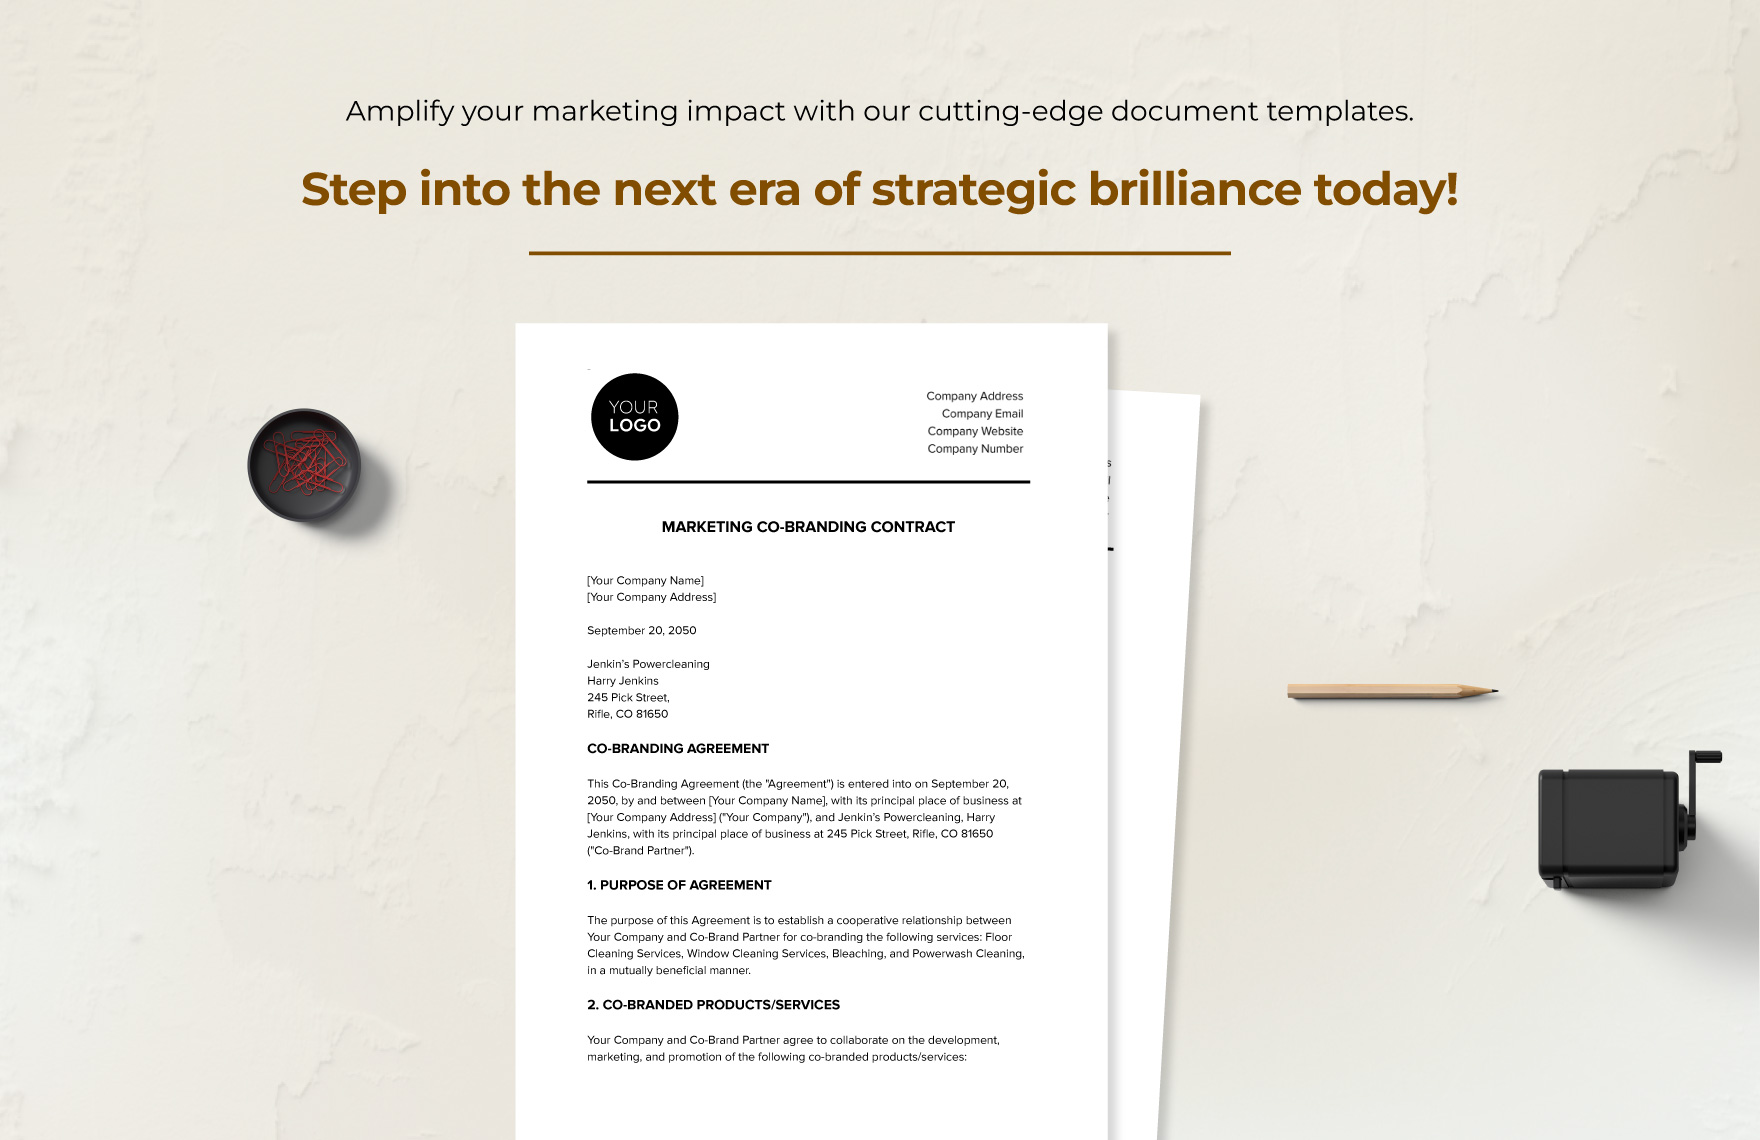 Marketing Co-branding Contract Template